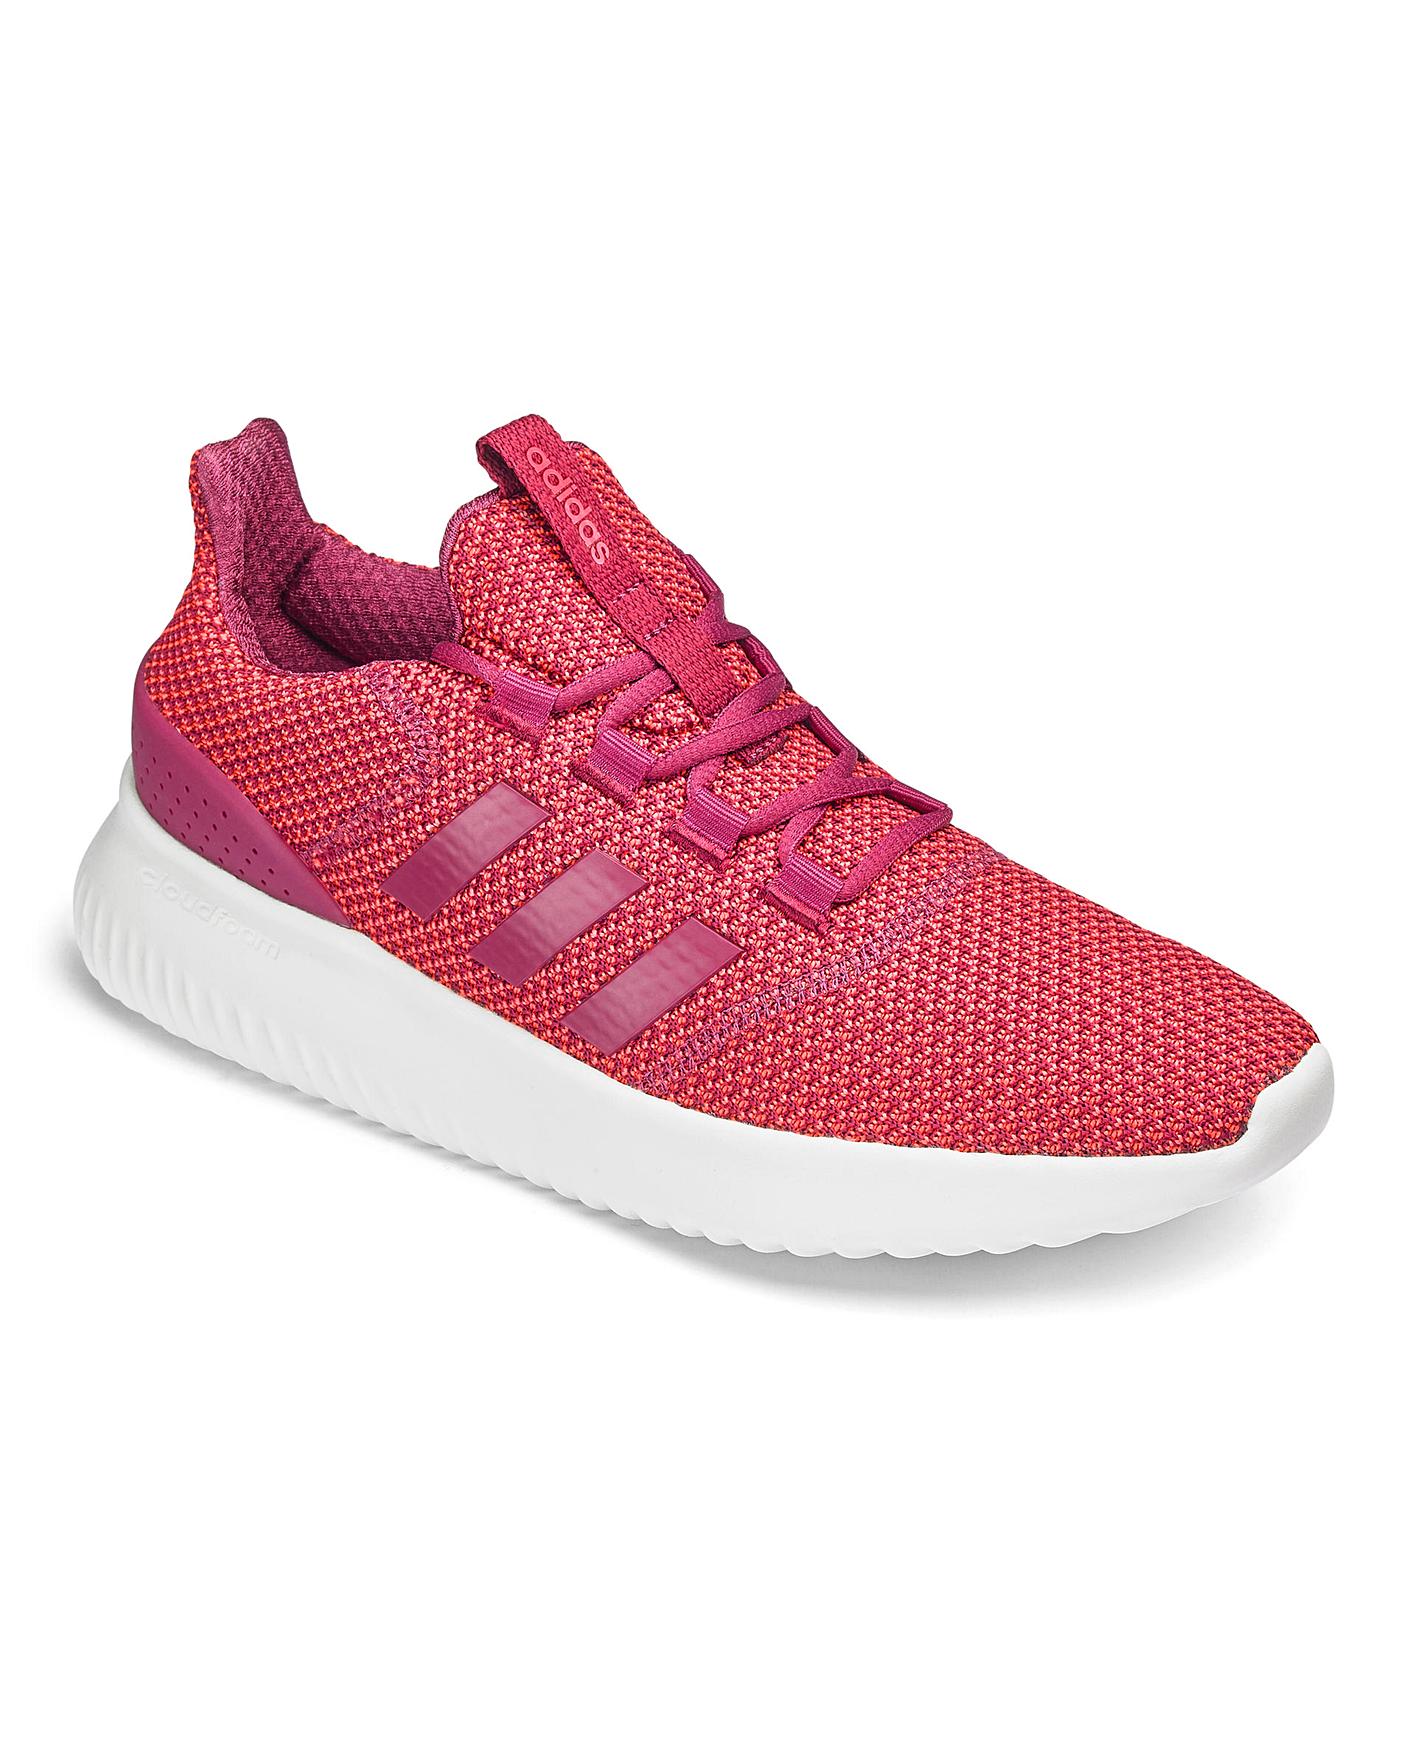 adidas cloudfoam ultimate trainers